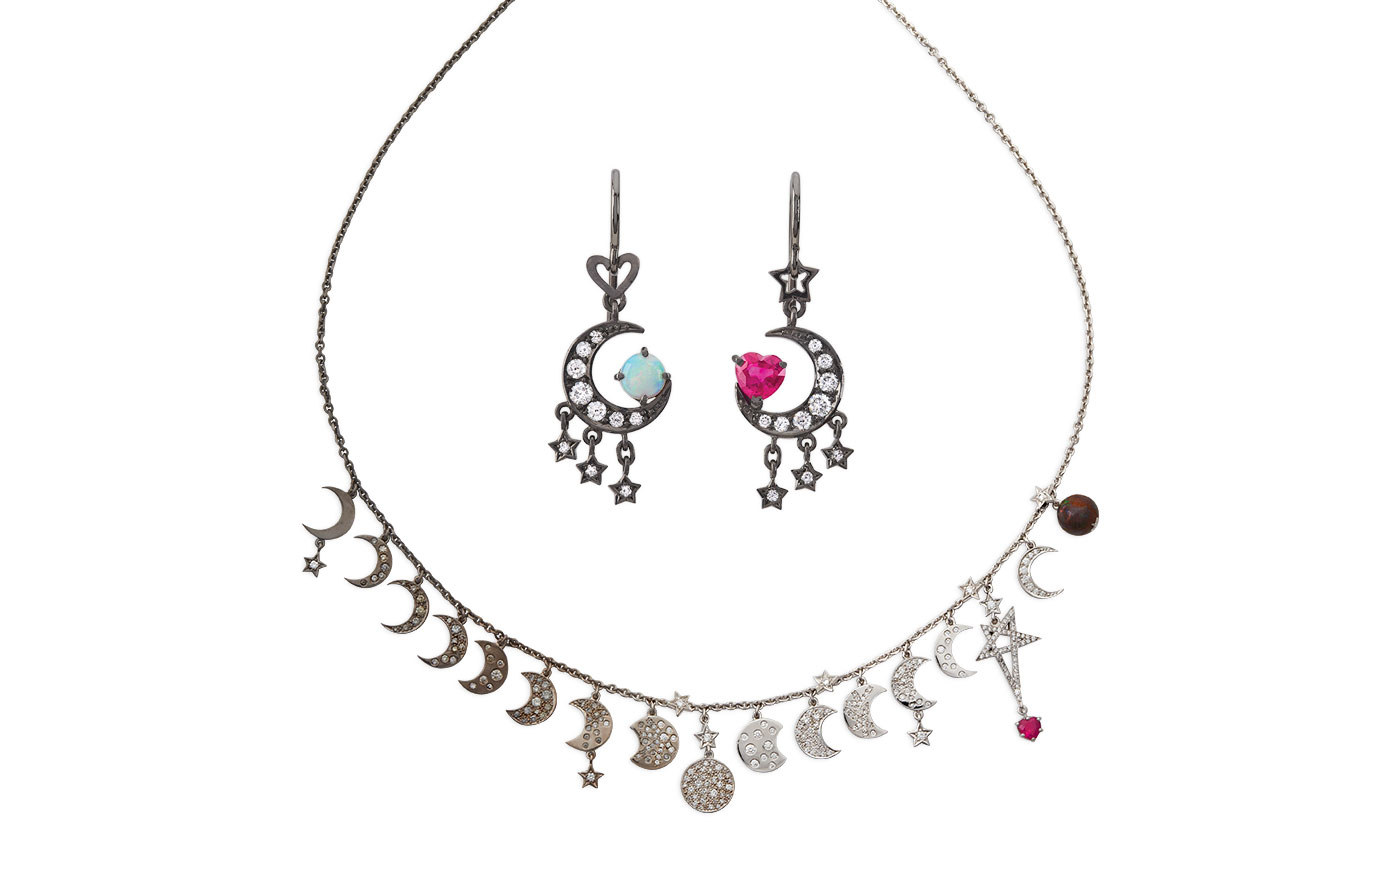 Solange Azagury-Partridge 'I love you to the Moon and back' suite with rubies, opals and diamonds in white gold